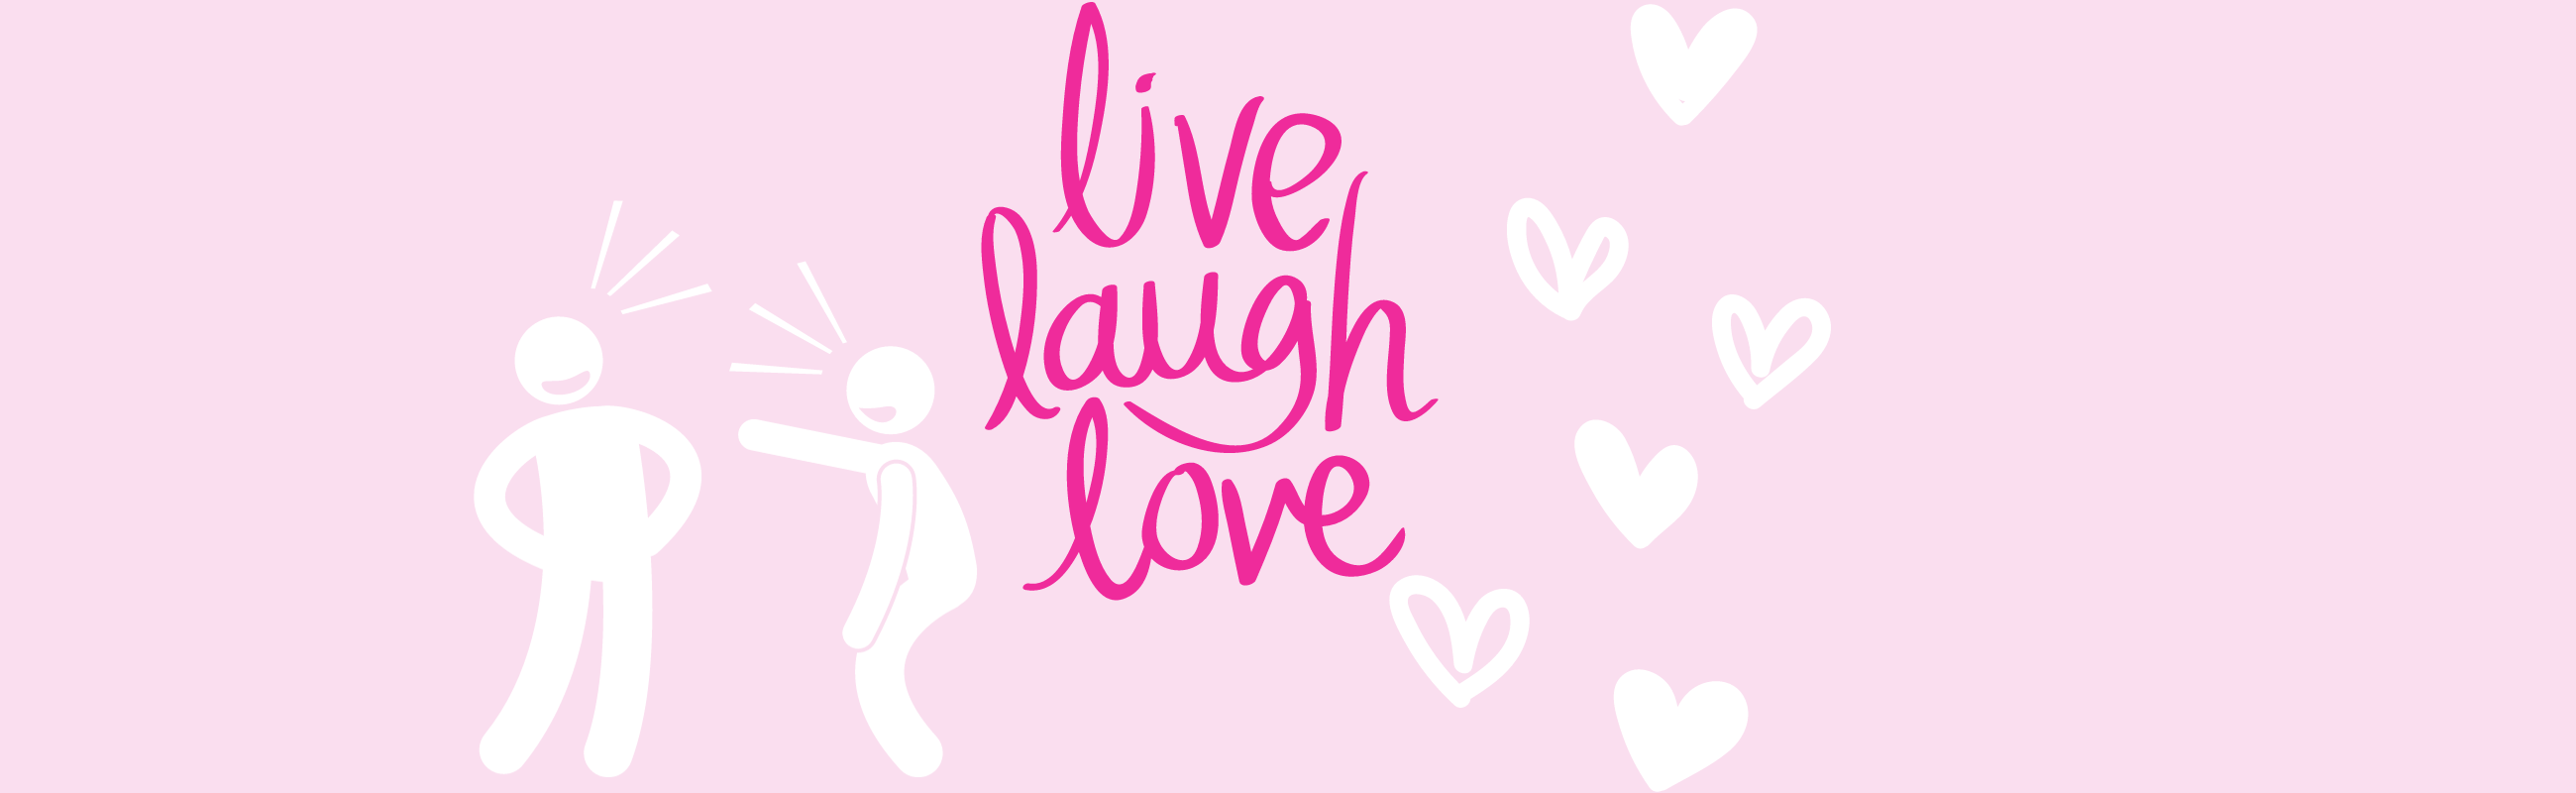 Image depicts stick figure couple laughing with the words live, laugh, love.